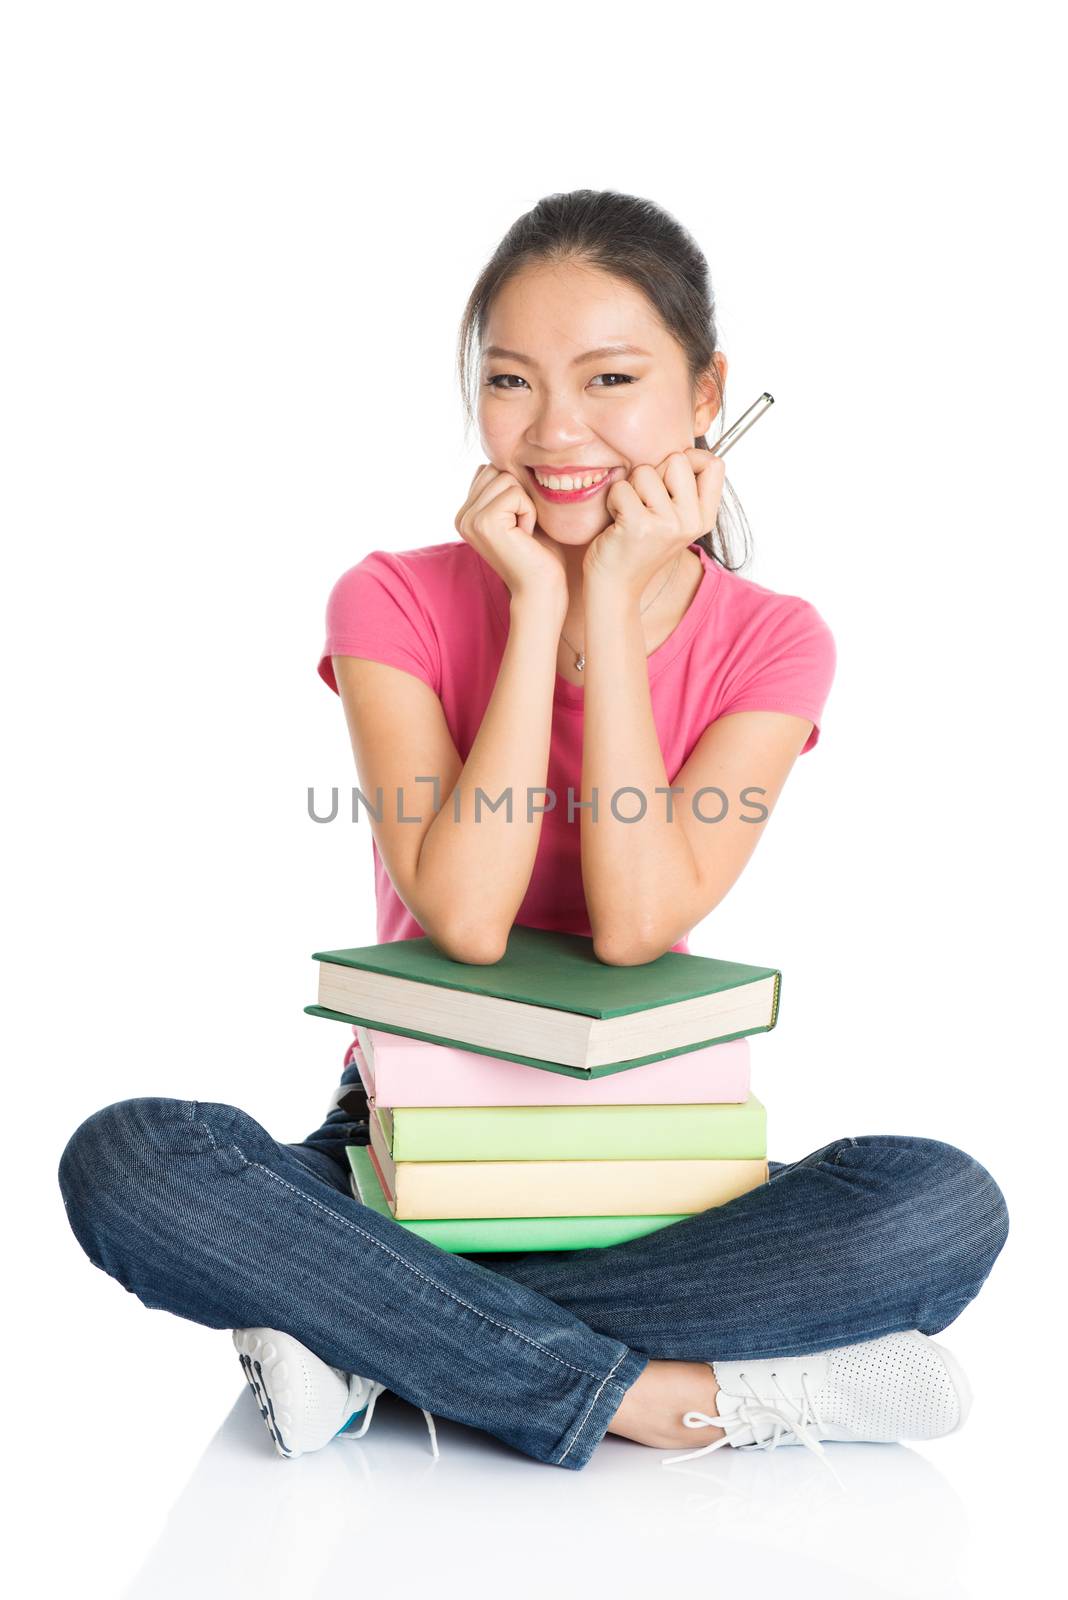 Full body young Asian girl in pink shirt with textbooks, seated on floor, full length isolated on white background.